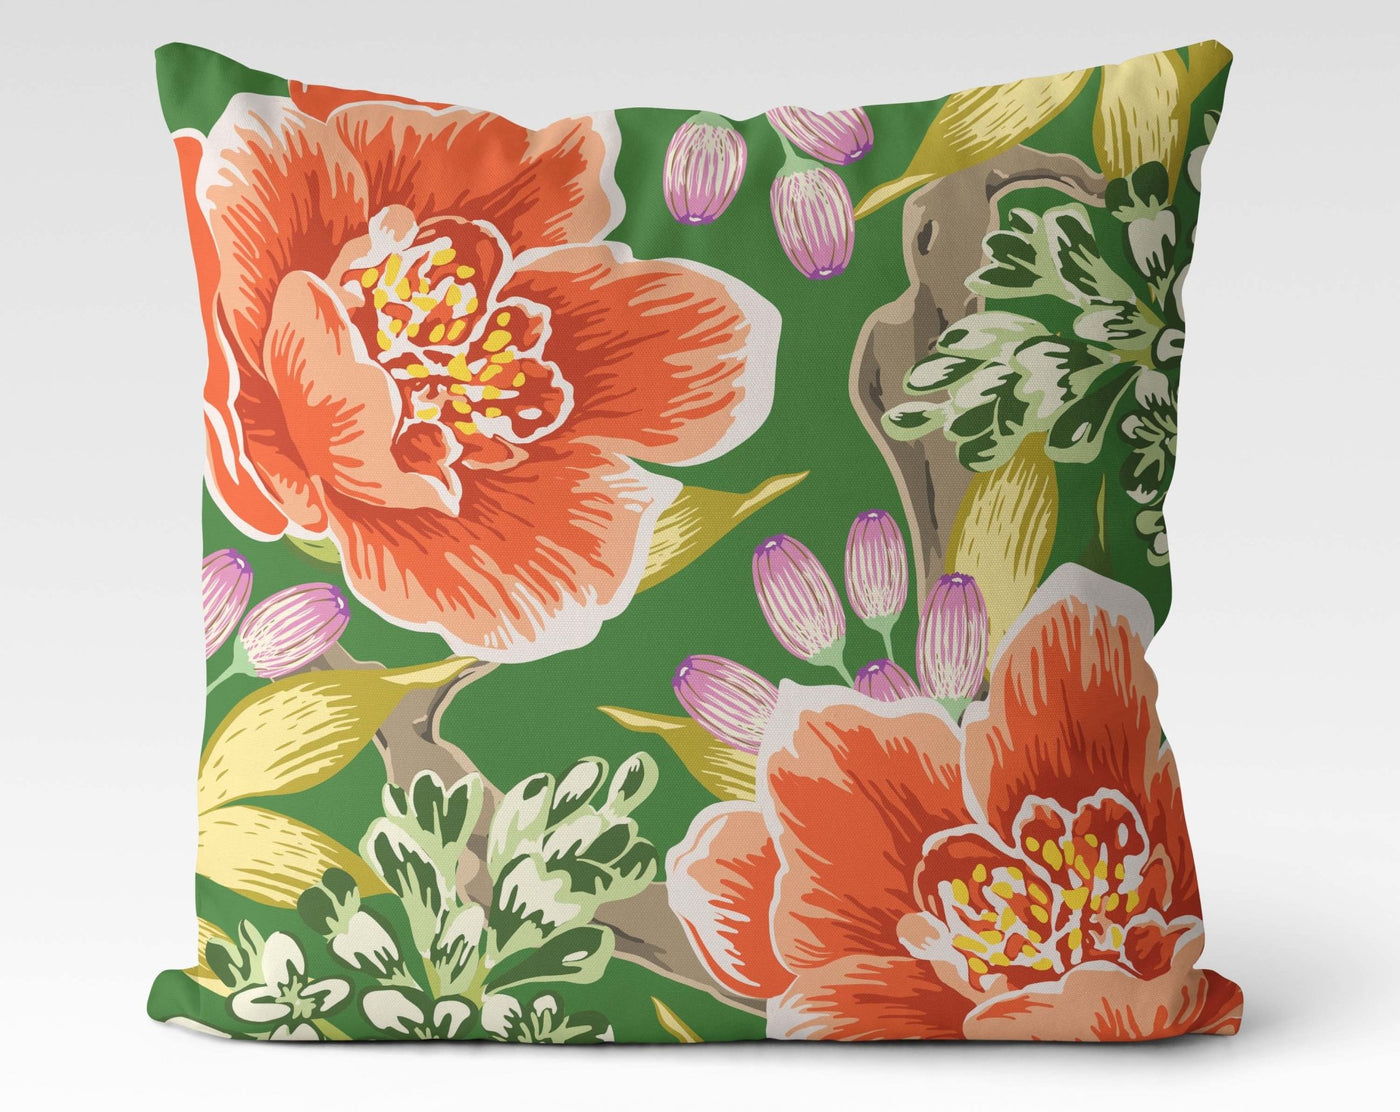 Exclusive Floral Green Thibaut Inspired Pillow Throw Cover with Insert - Cush Potato Pillows